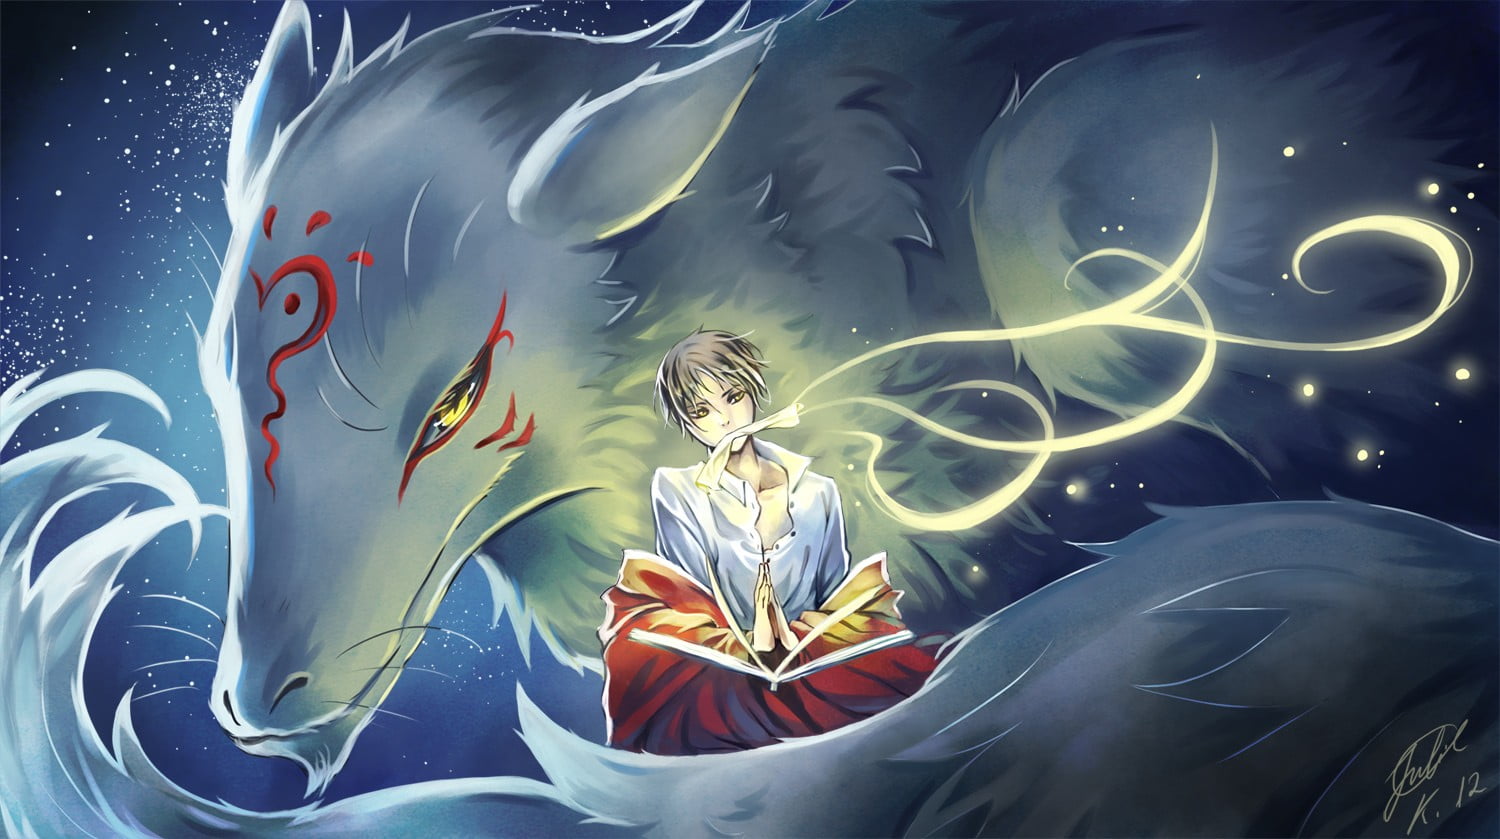 man sitting with white fox on his back anime digital wallpaper, Natsume Book of Friends, Natsume Yuujinchou